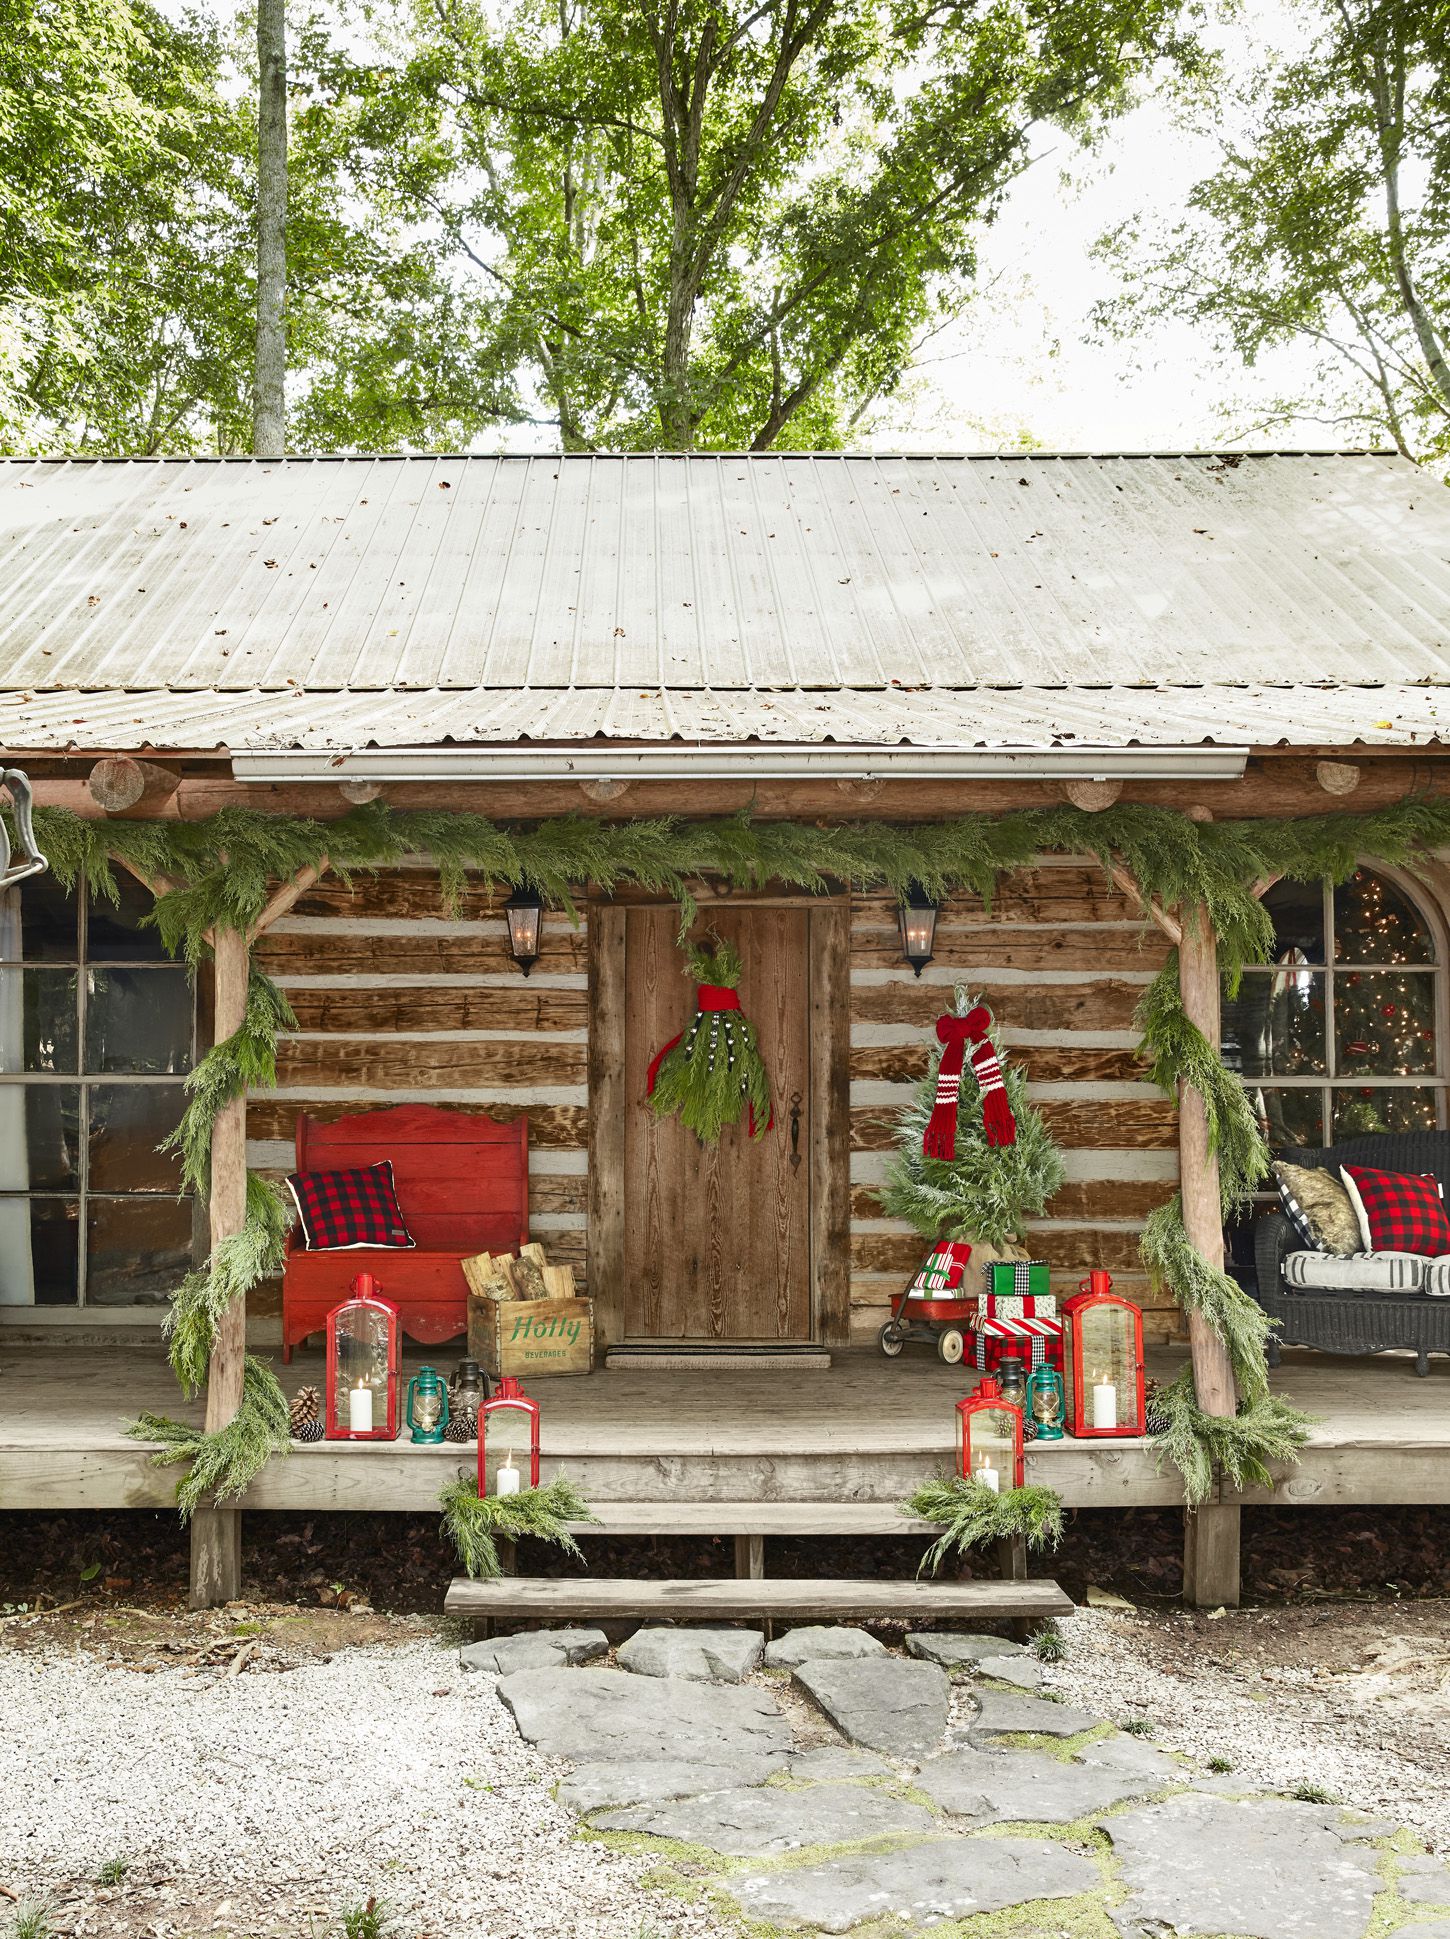 40 Outdoor Christmas Decorations - Ideas for Outside Christmas Porch